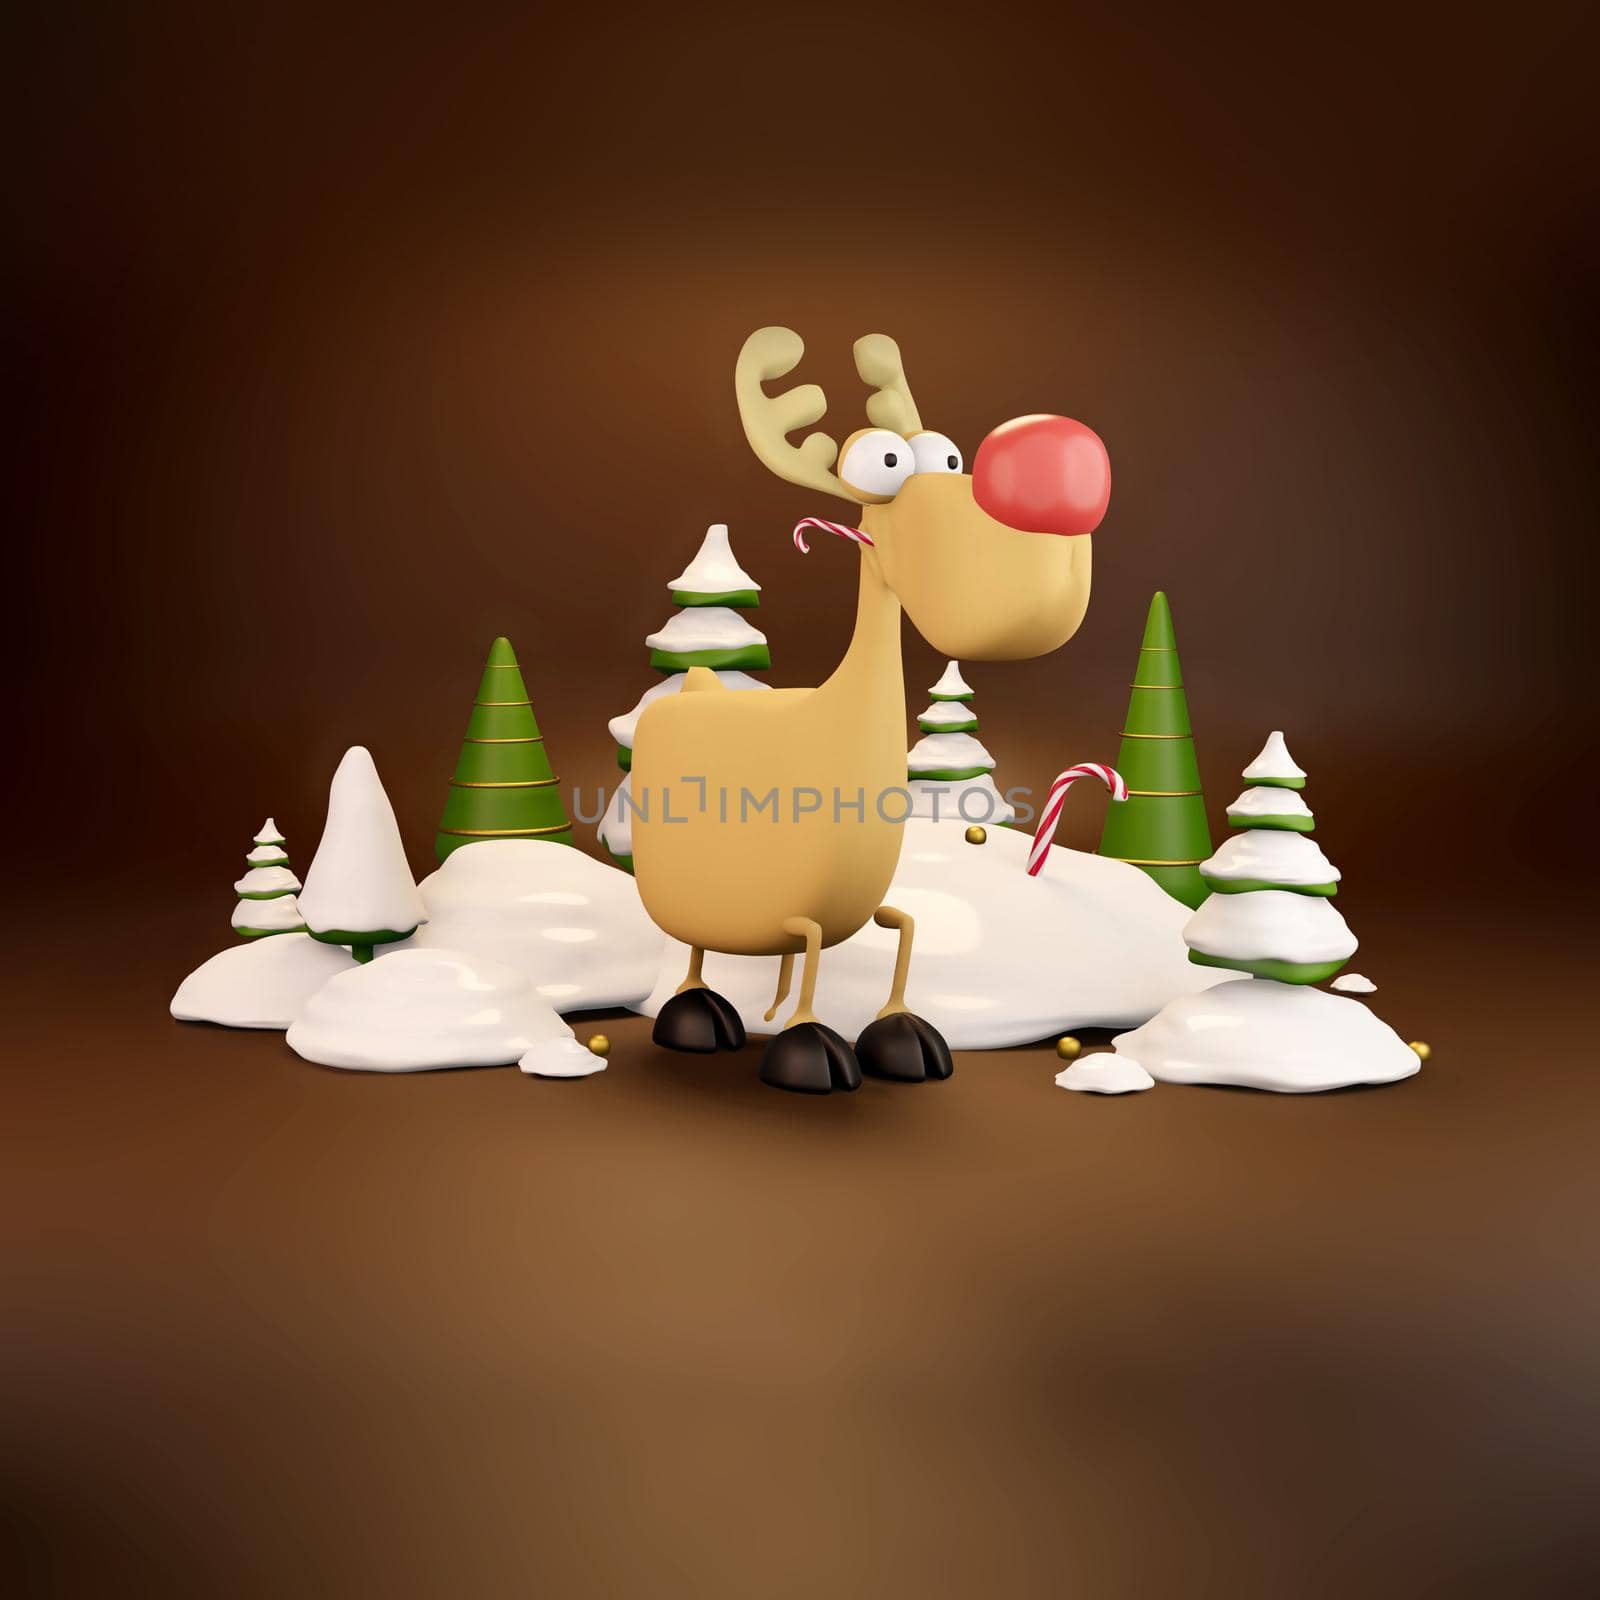 New 2022 Year is coming. Deer in snow, candy and green chrisnmas trees. Illustration